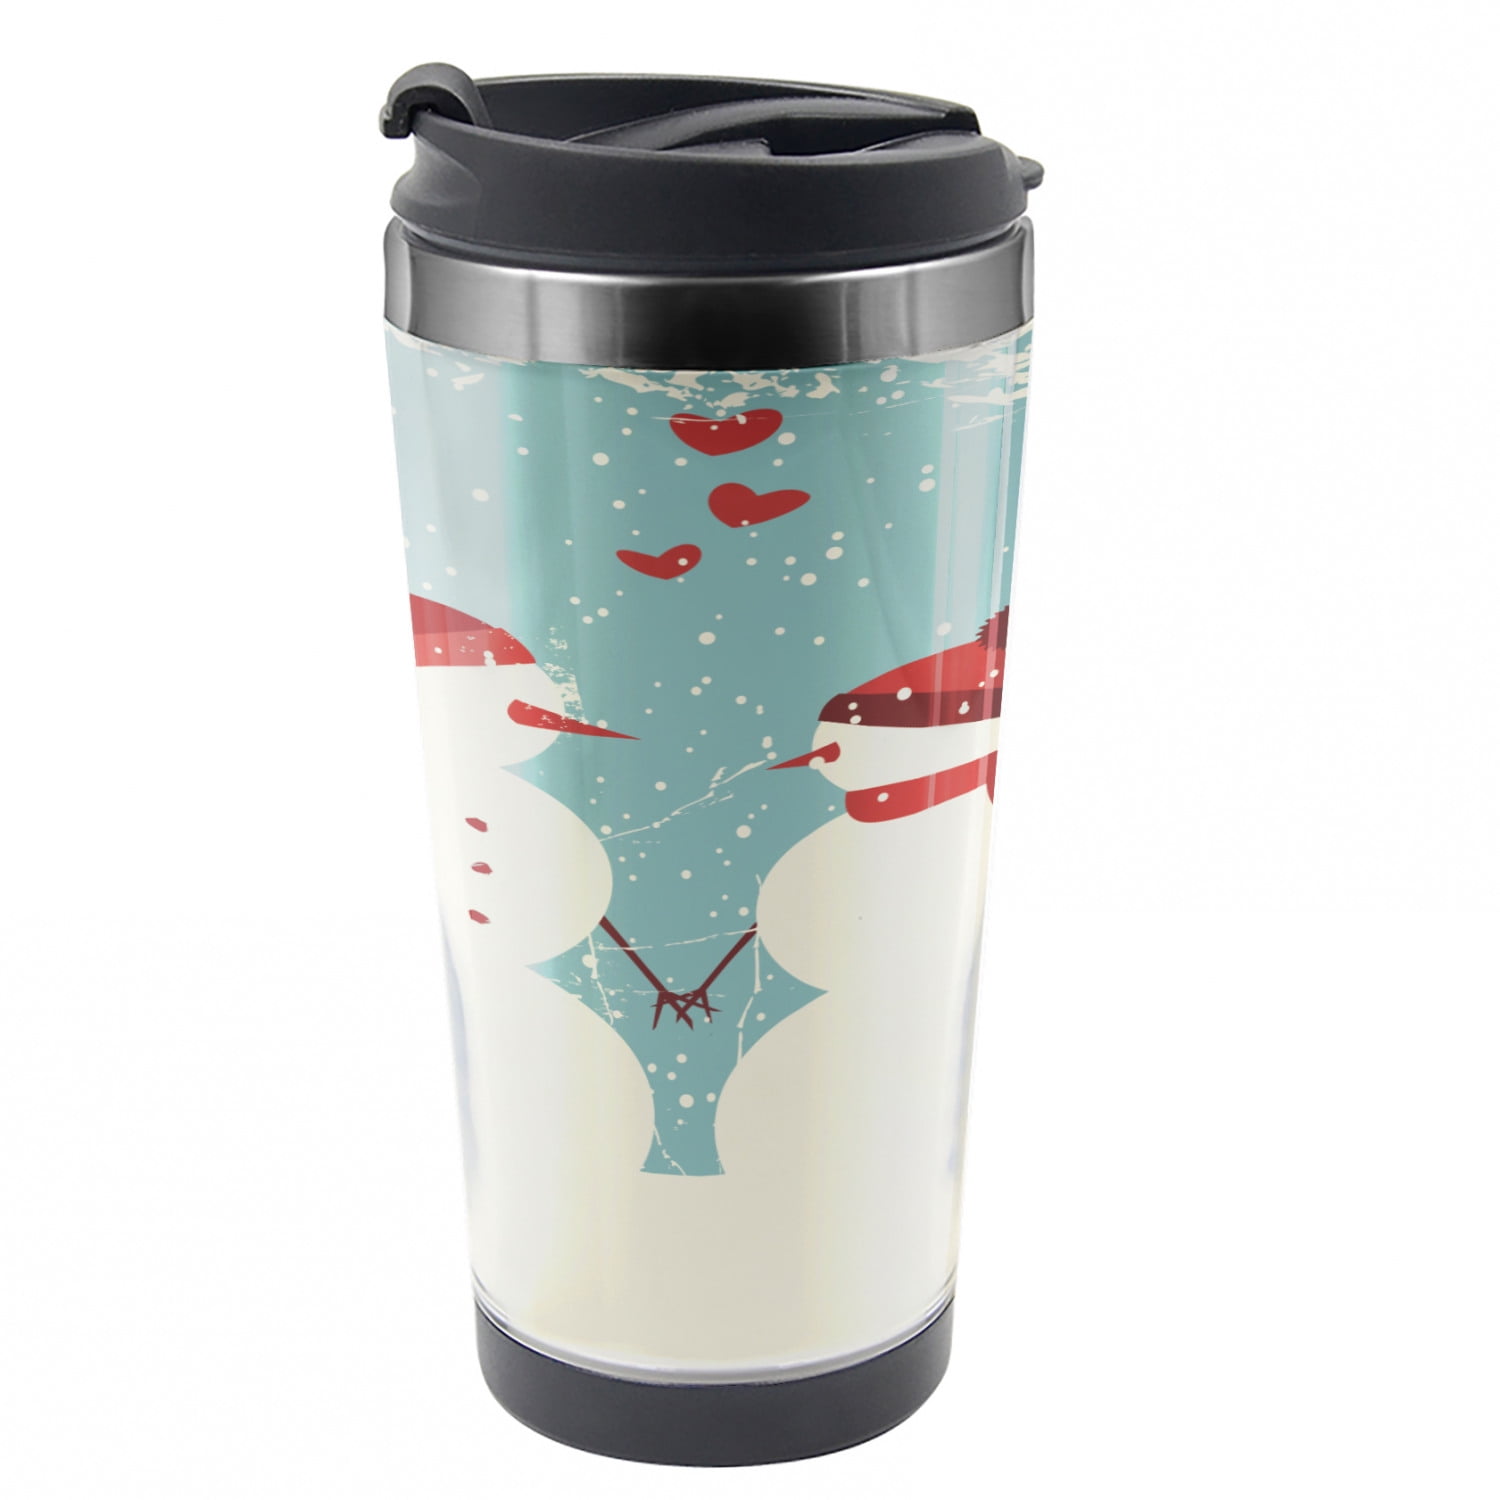 Picasso 20-Ounce Stainless Steel Travel Mug with Insulated Wetsuit Cover Mugzie MAX Two Women Running